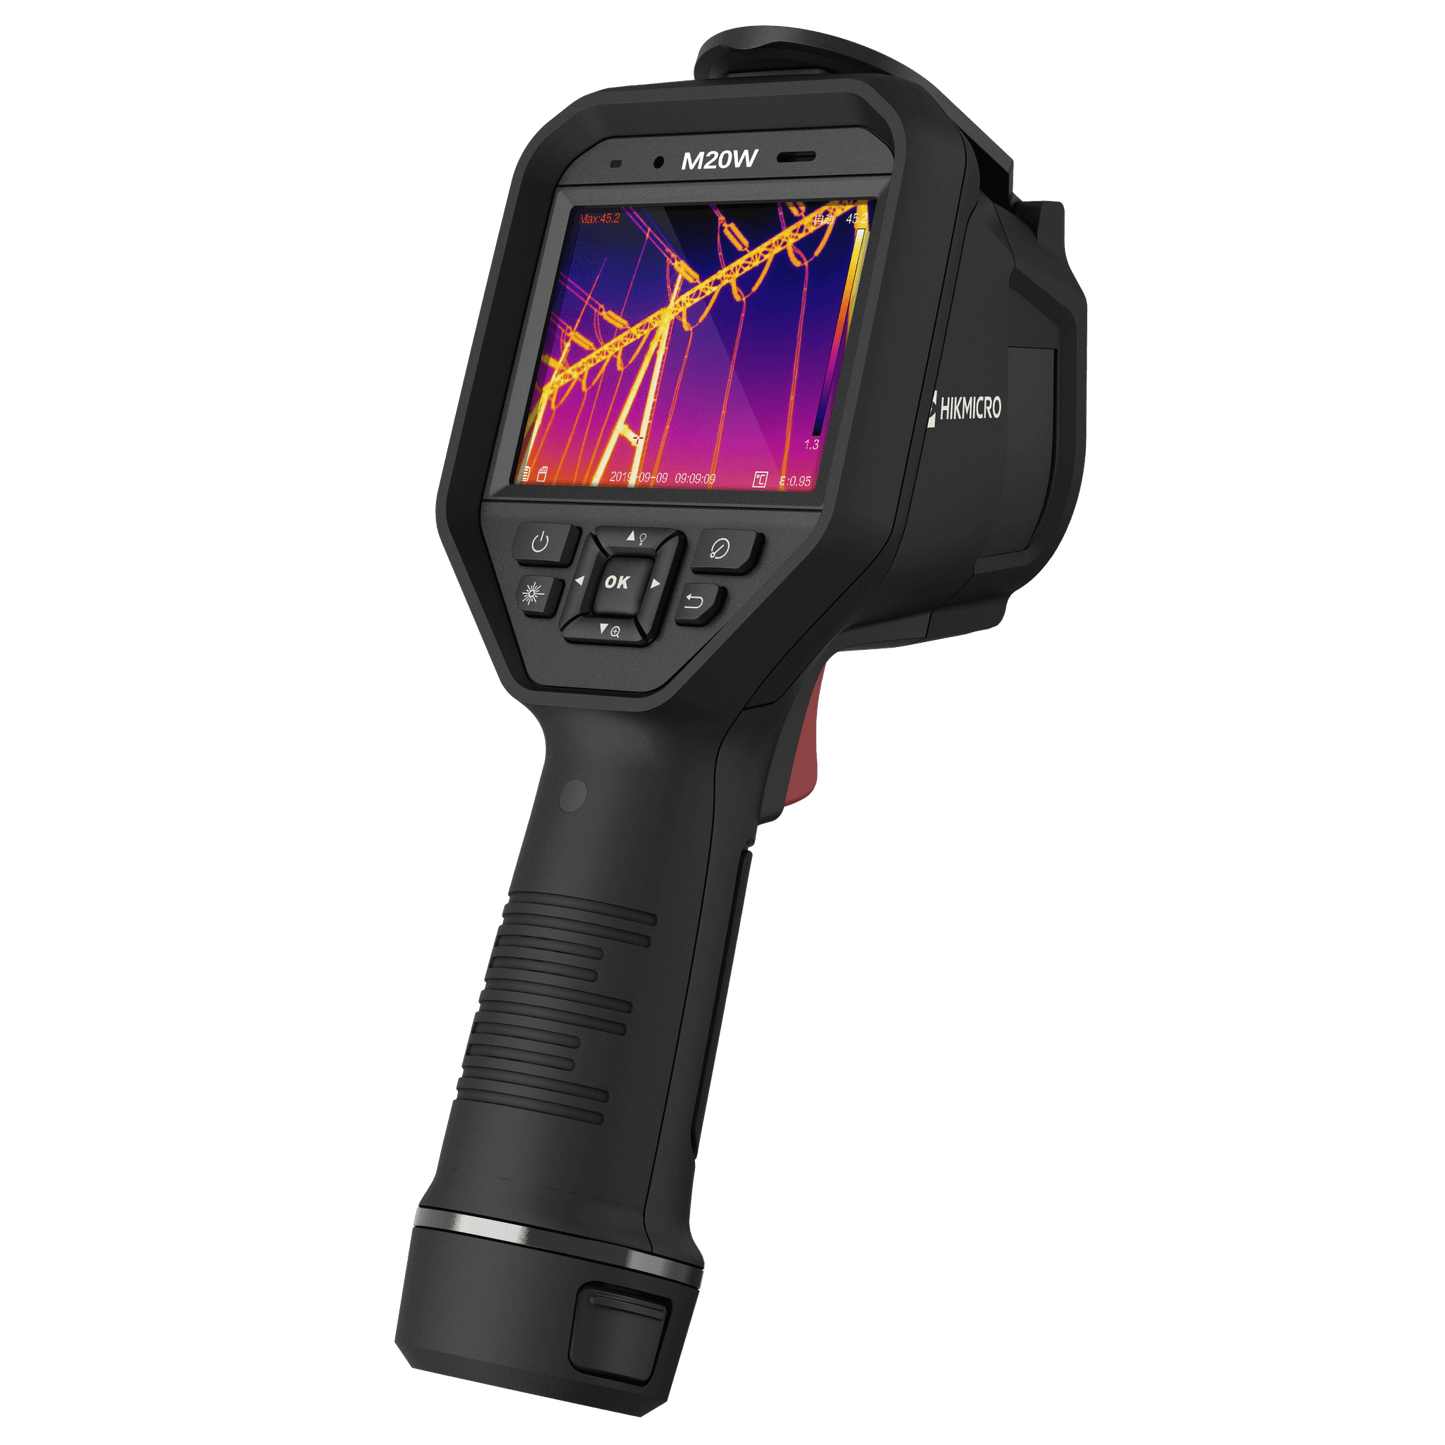 HikMicro M20W Handheld Thermography Camera on a transparent background - rear right view